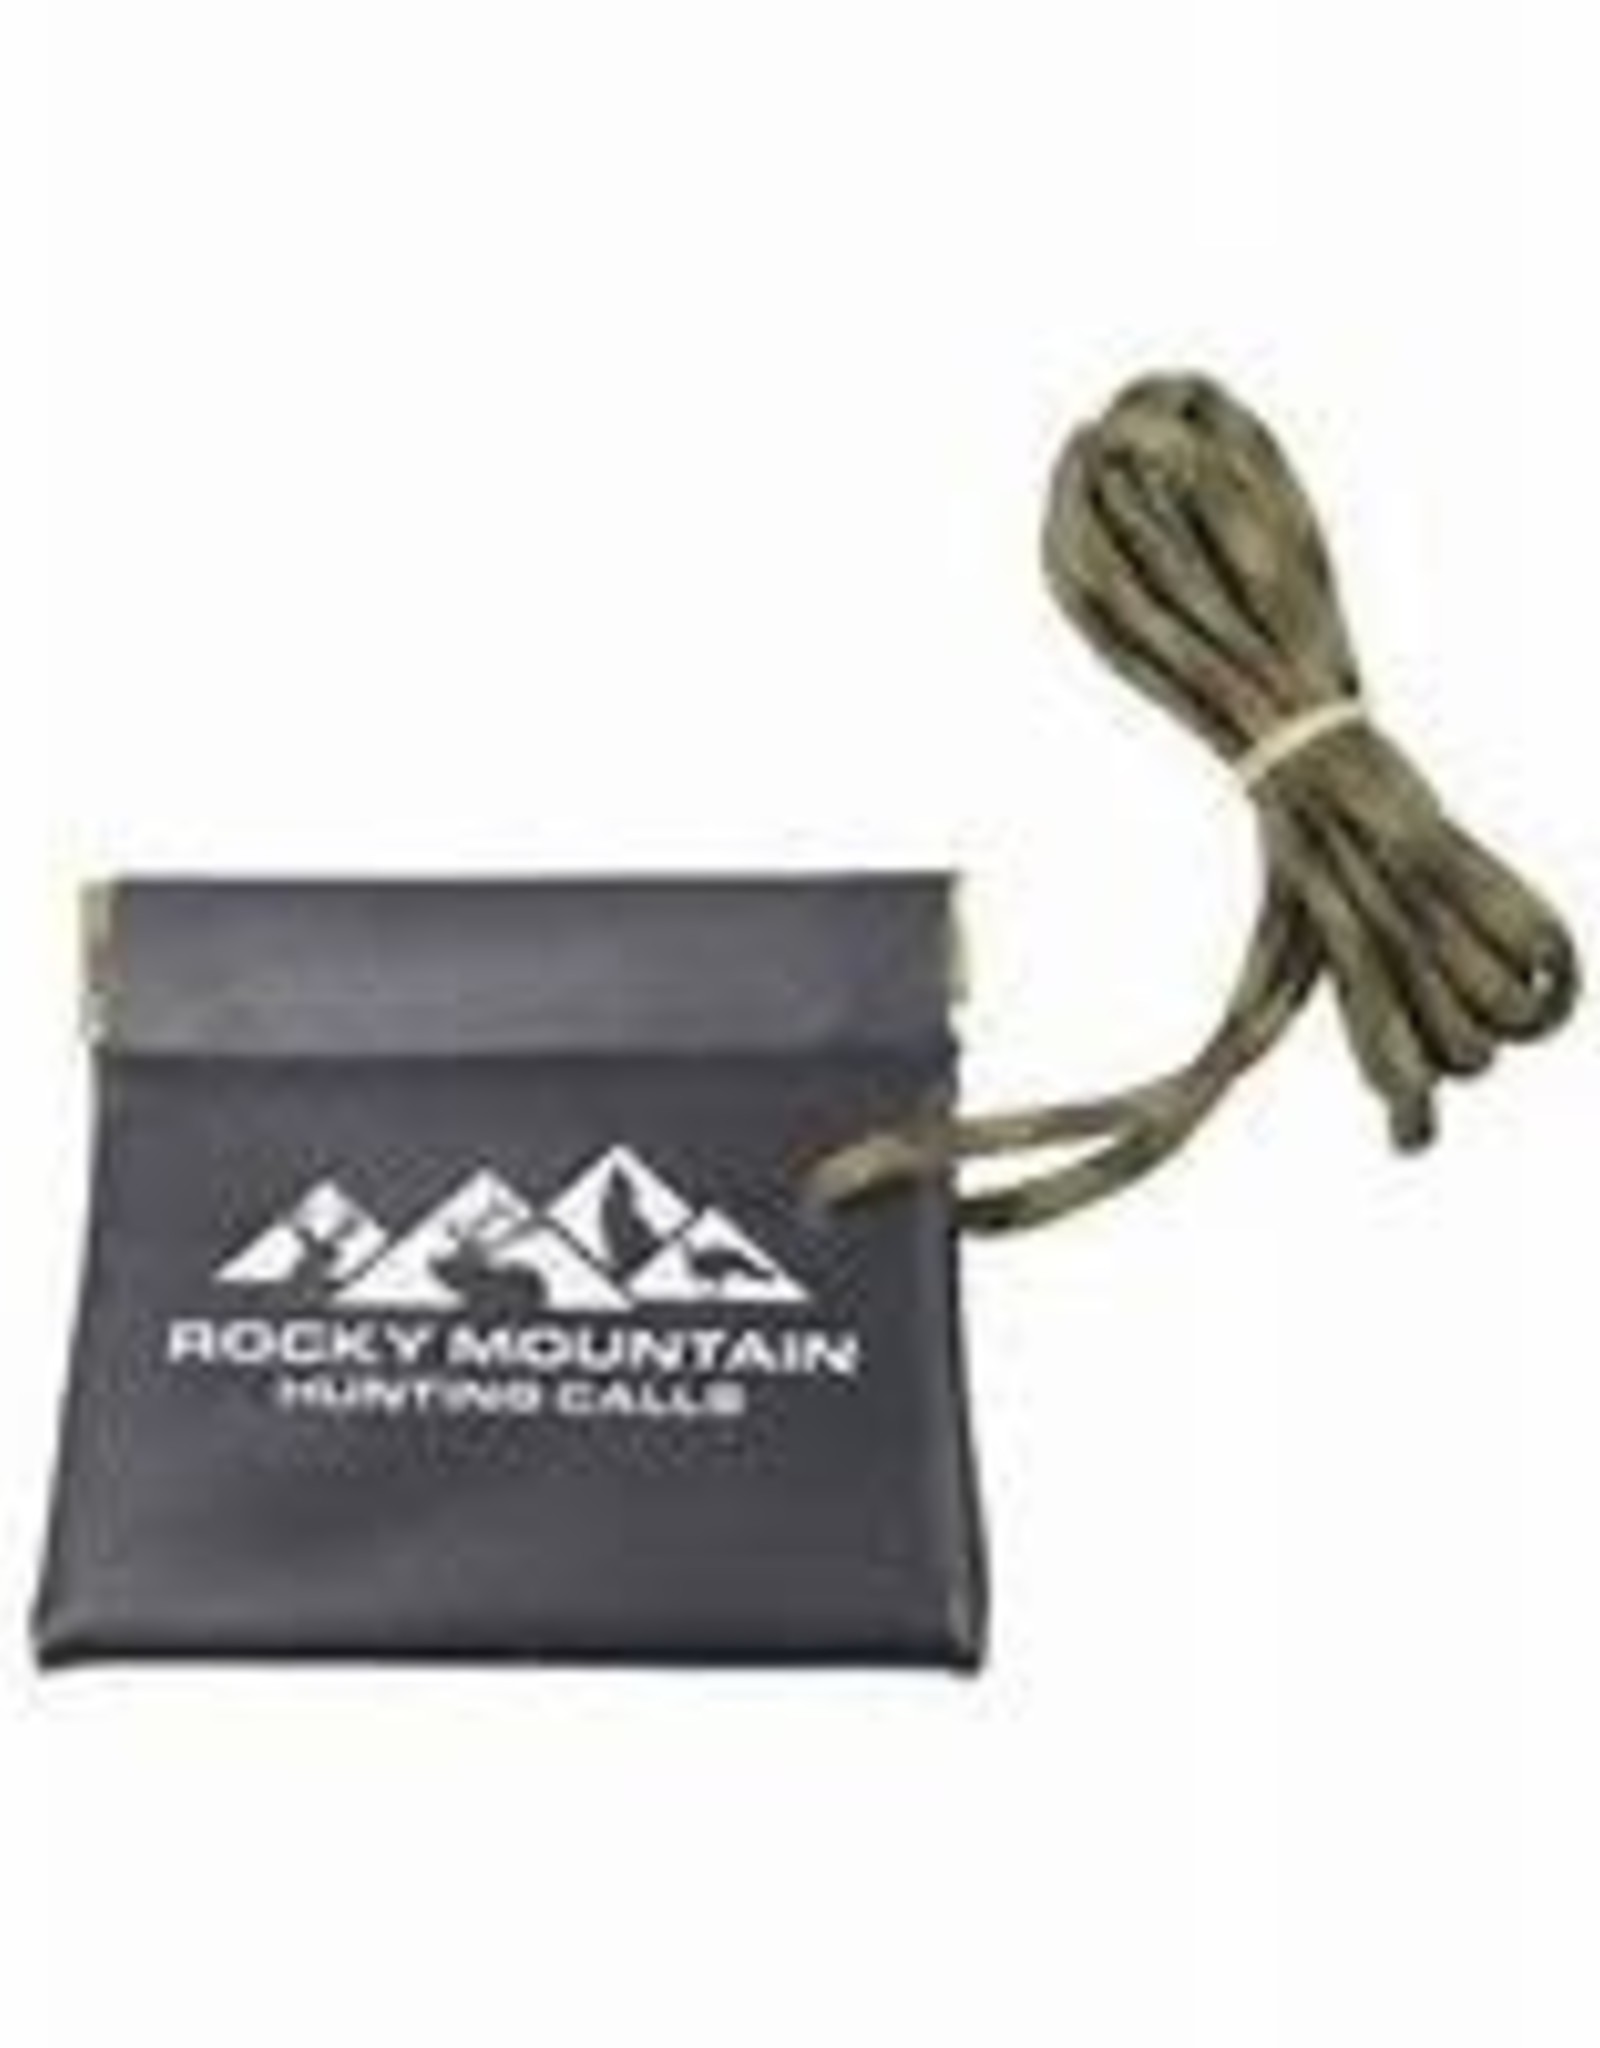 Rocky Mountain Mouth Call Carrying Case